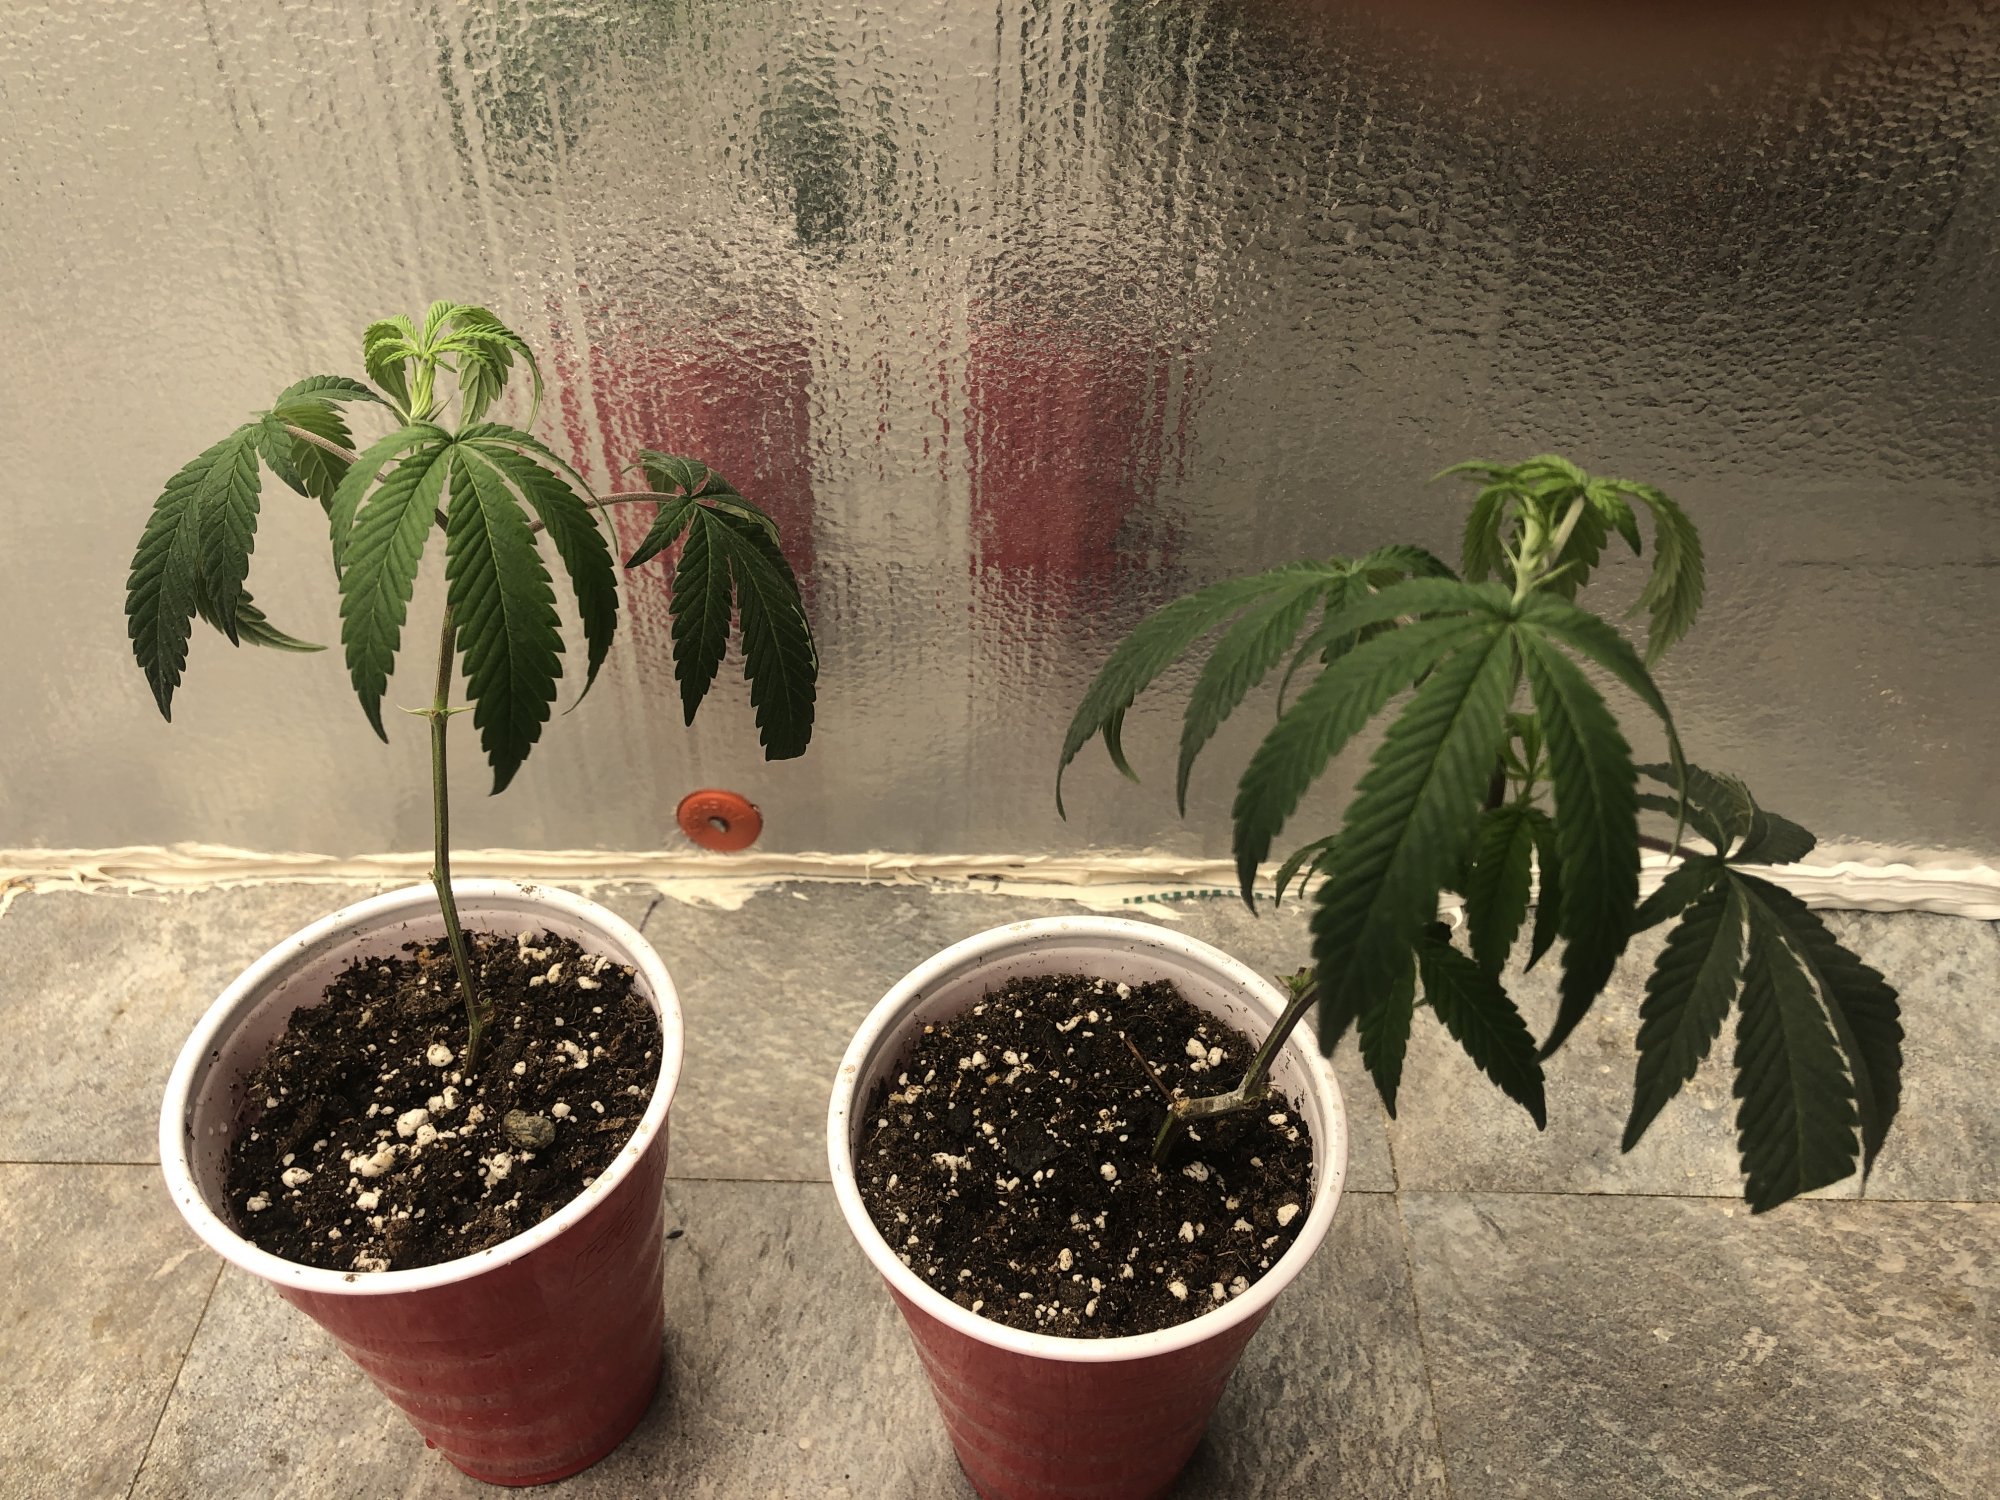 My plants dont look good can anyone help